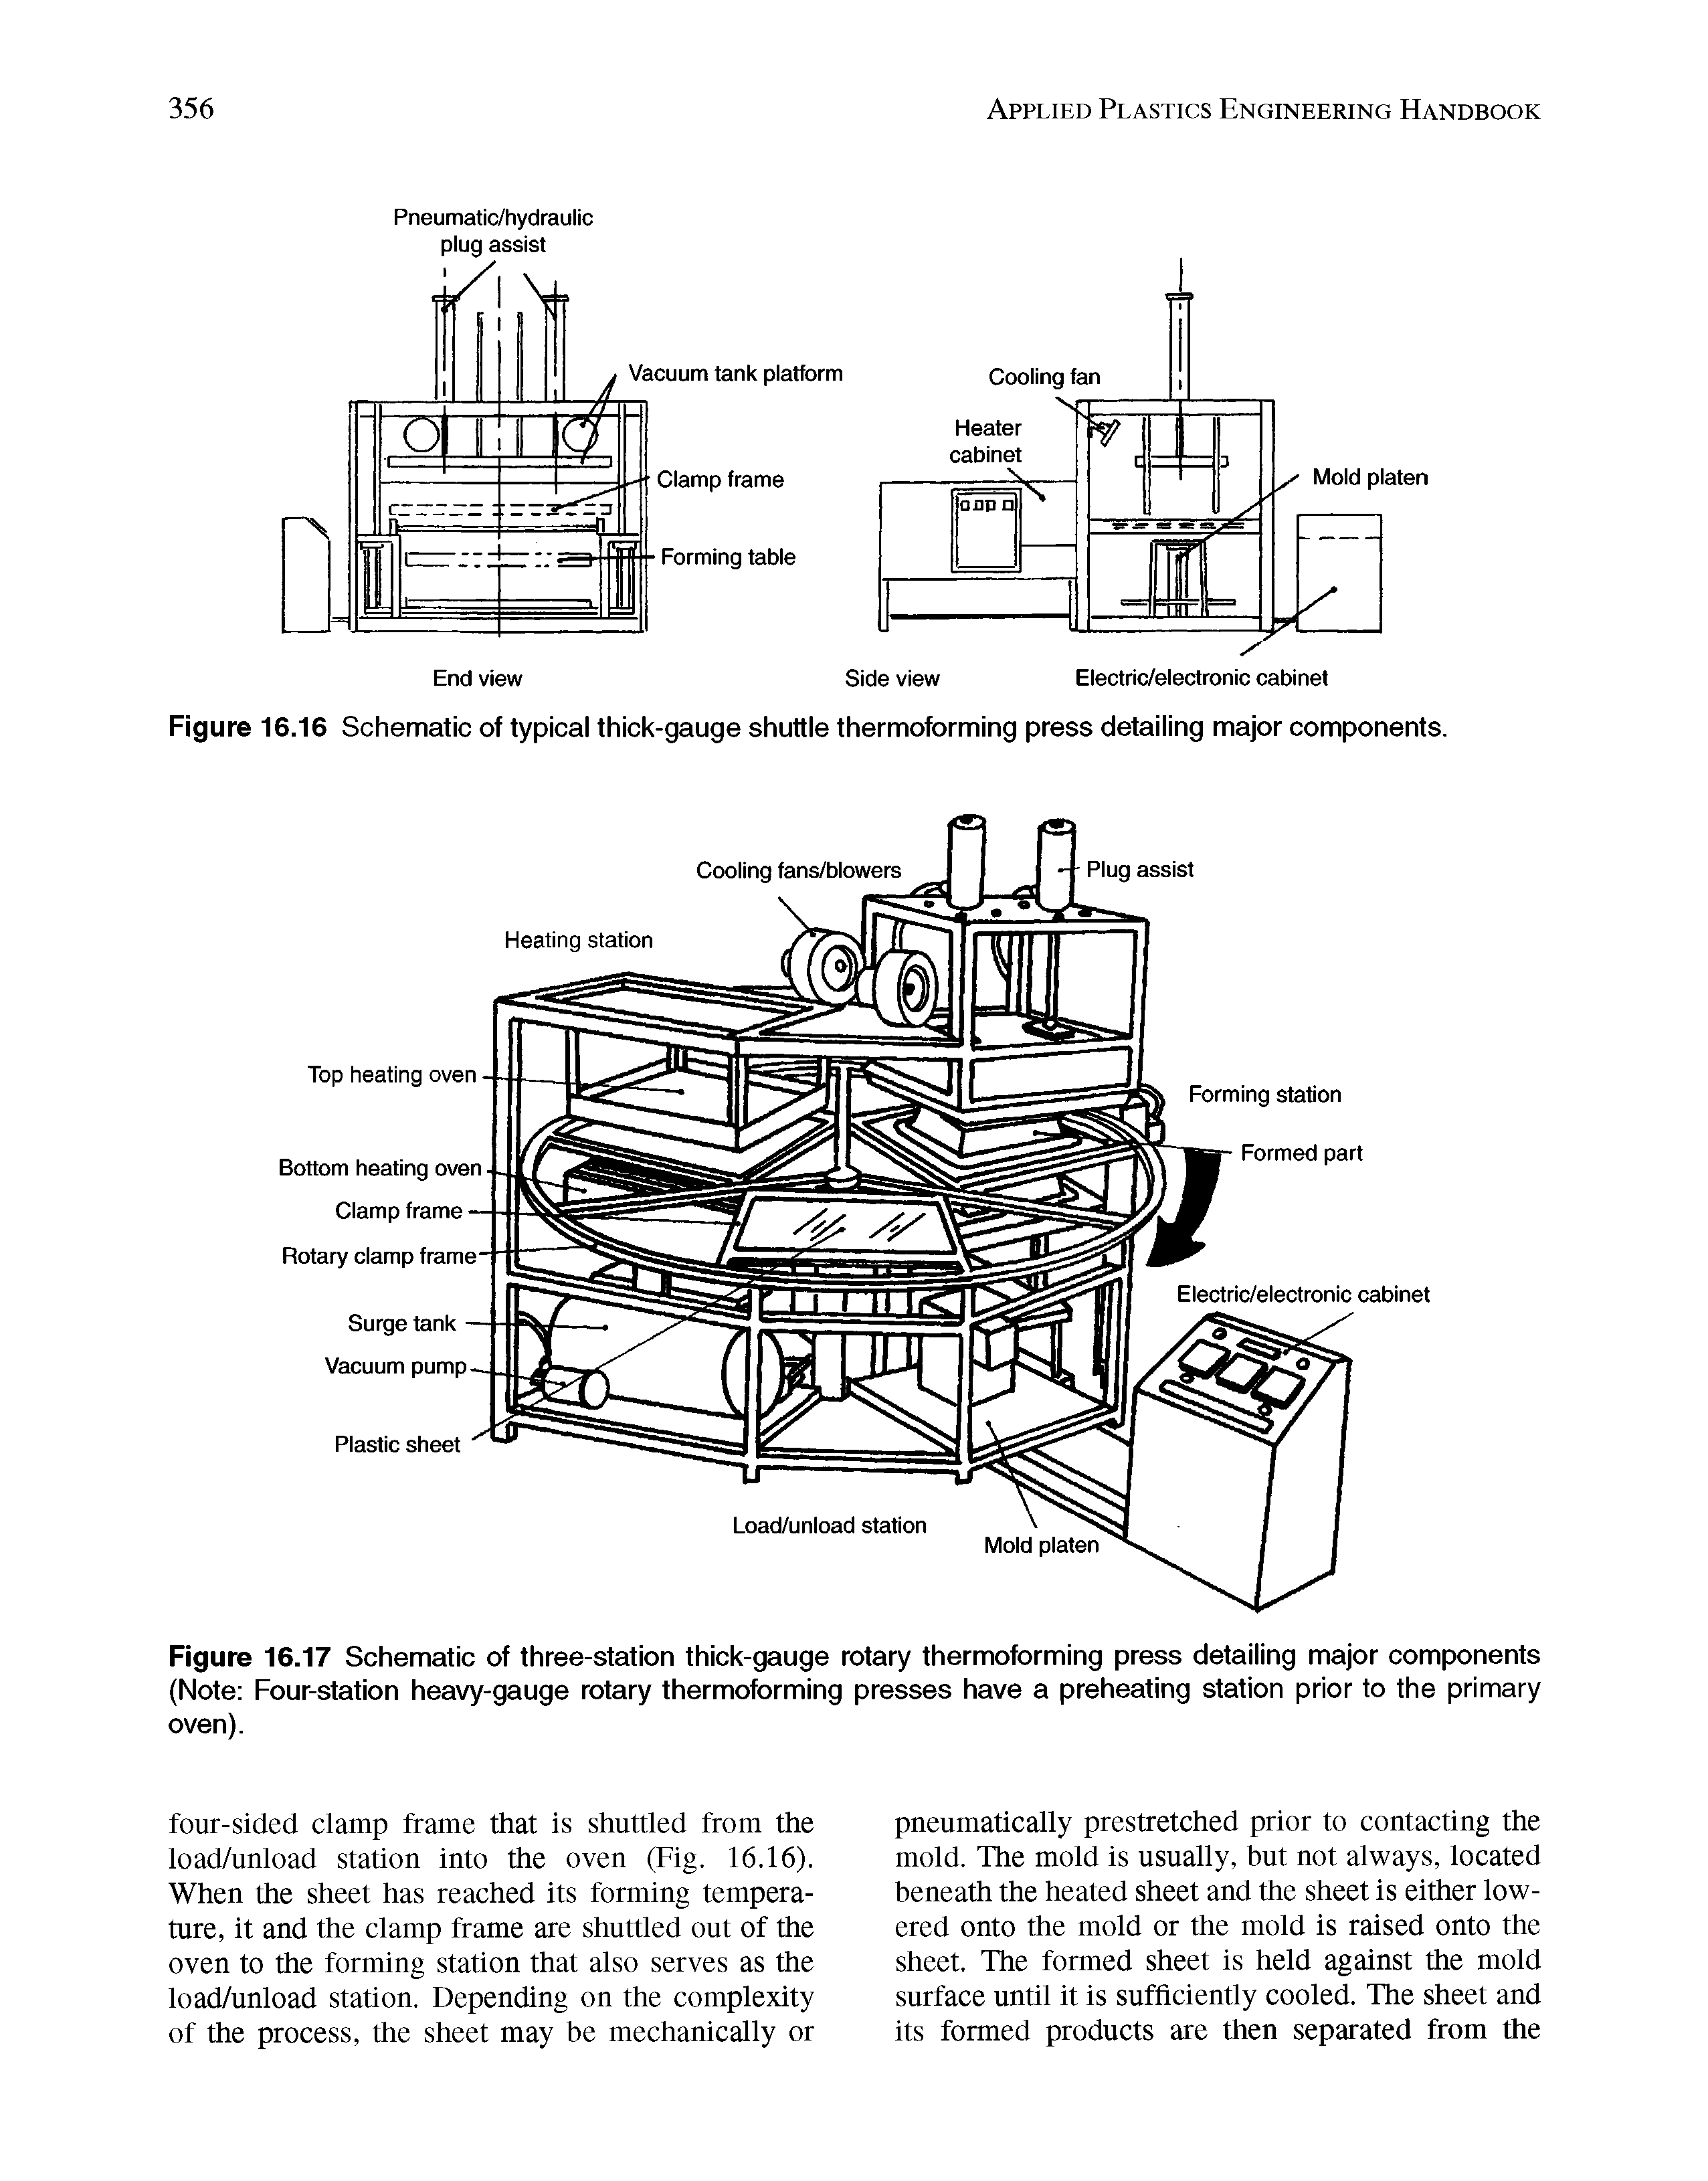 Figure 16.16 Schematic of typical thick-gauge shuttle thermoforming press detailing major components.